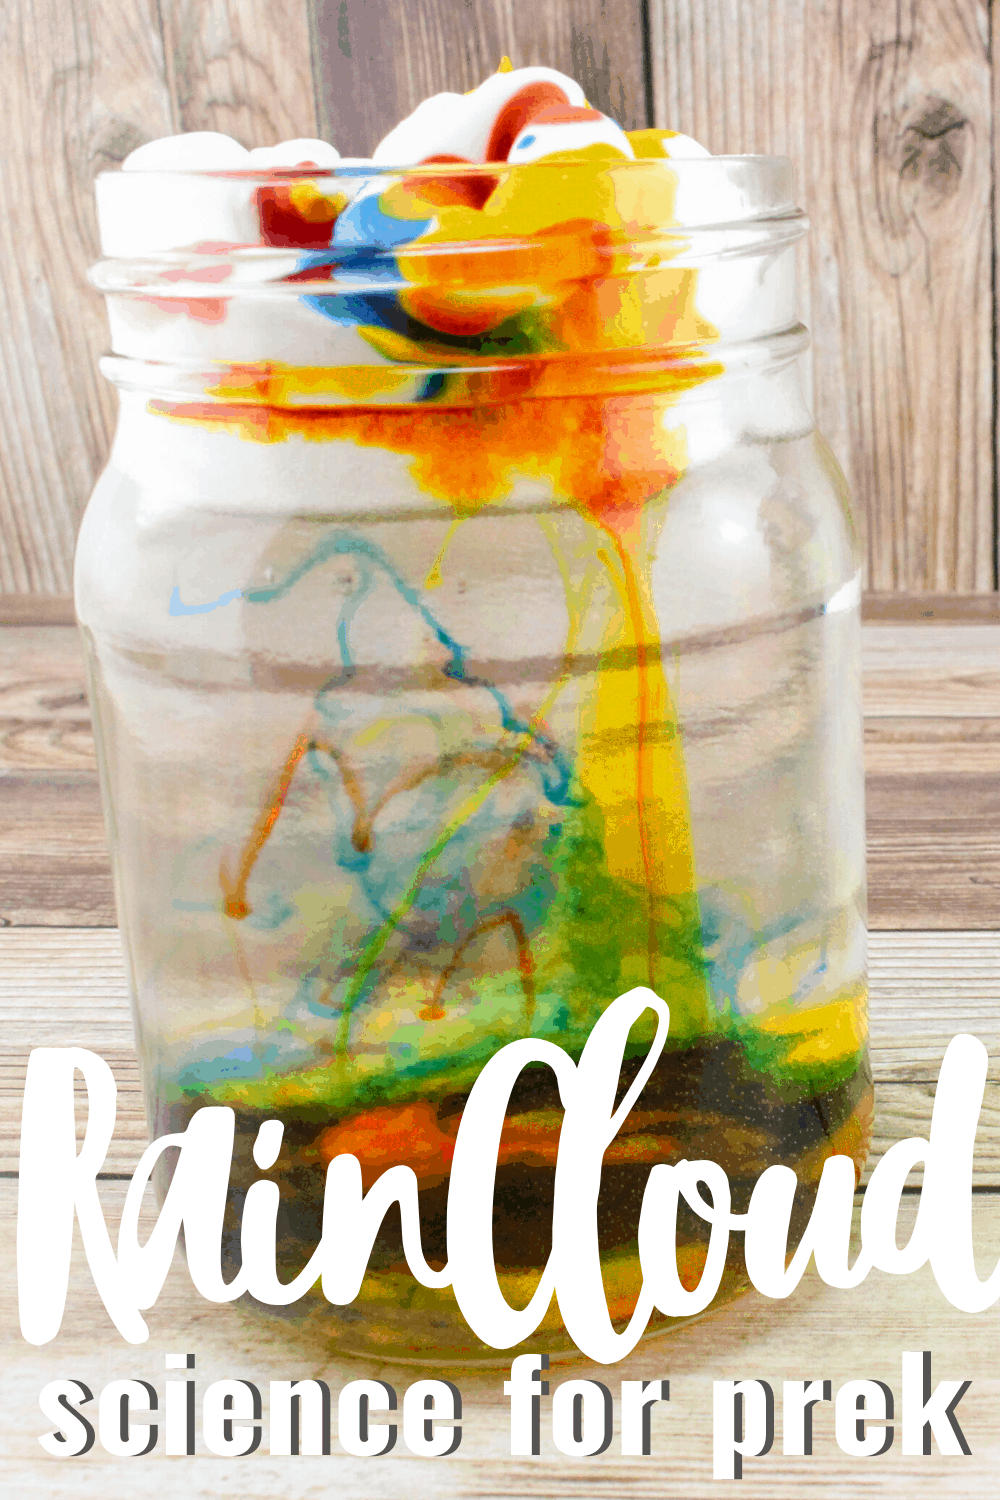 Making a rain cloud in a jar is a great way to explore weather with your preschoolers and young learners. They'll see up close how clouds make rain.